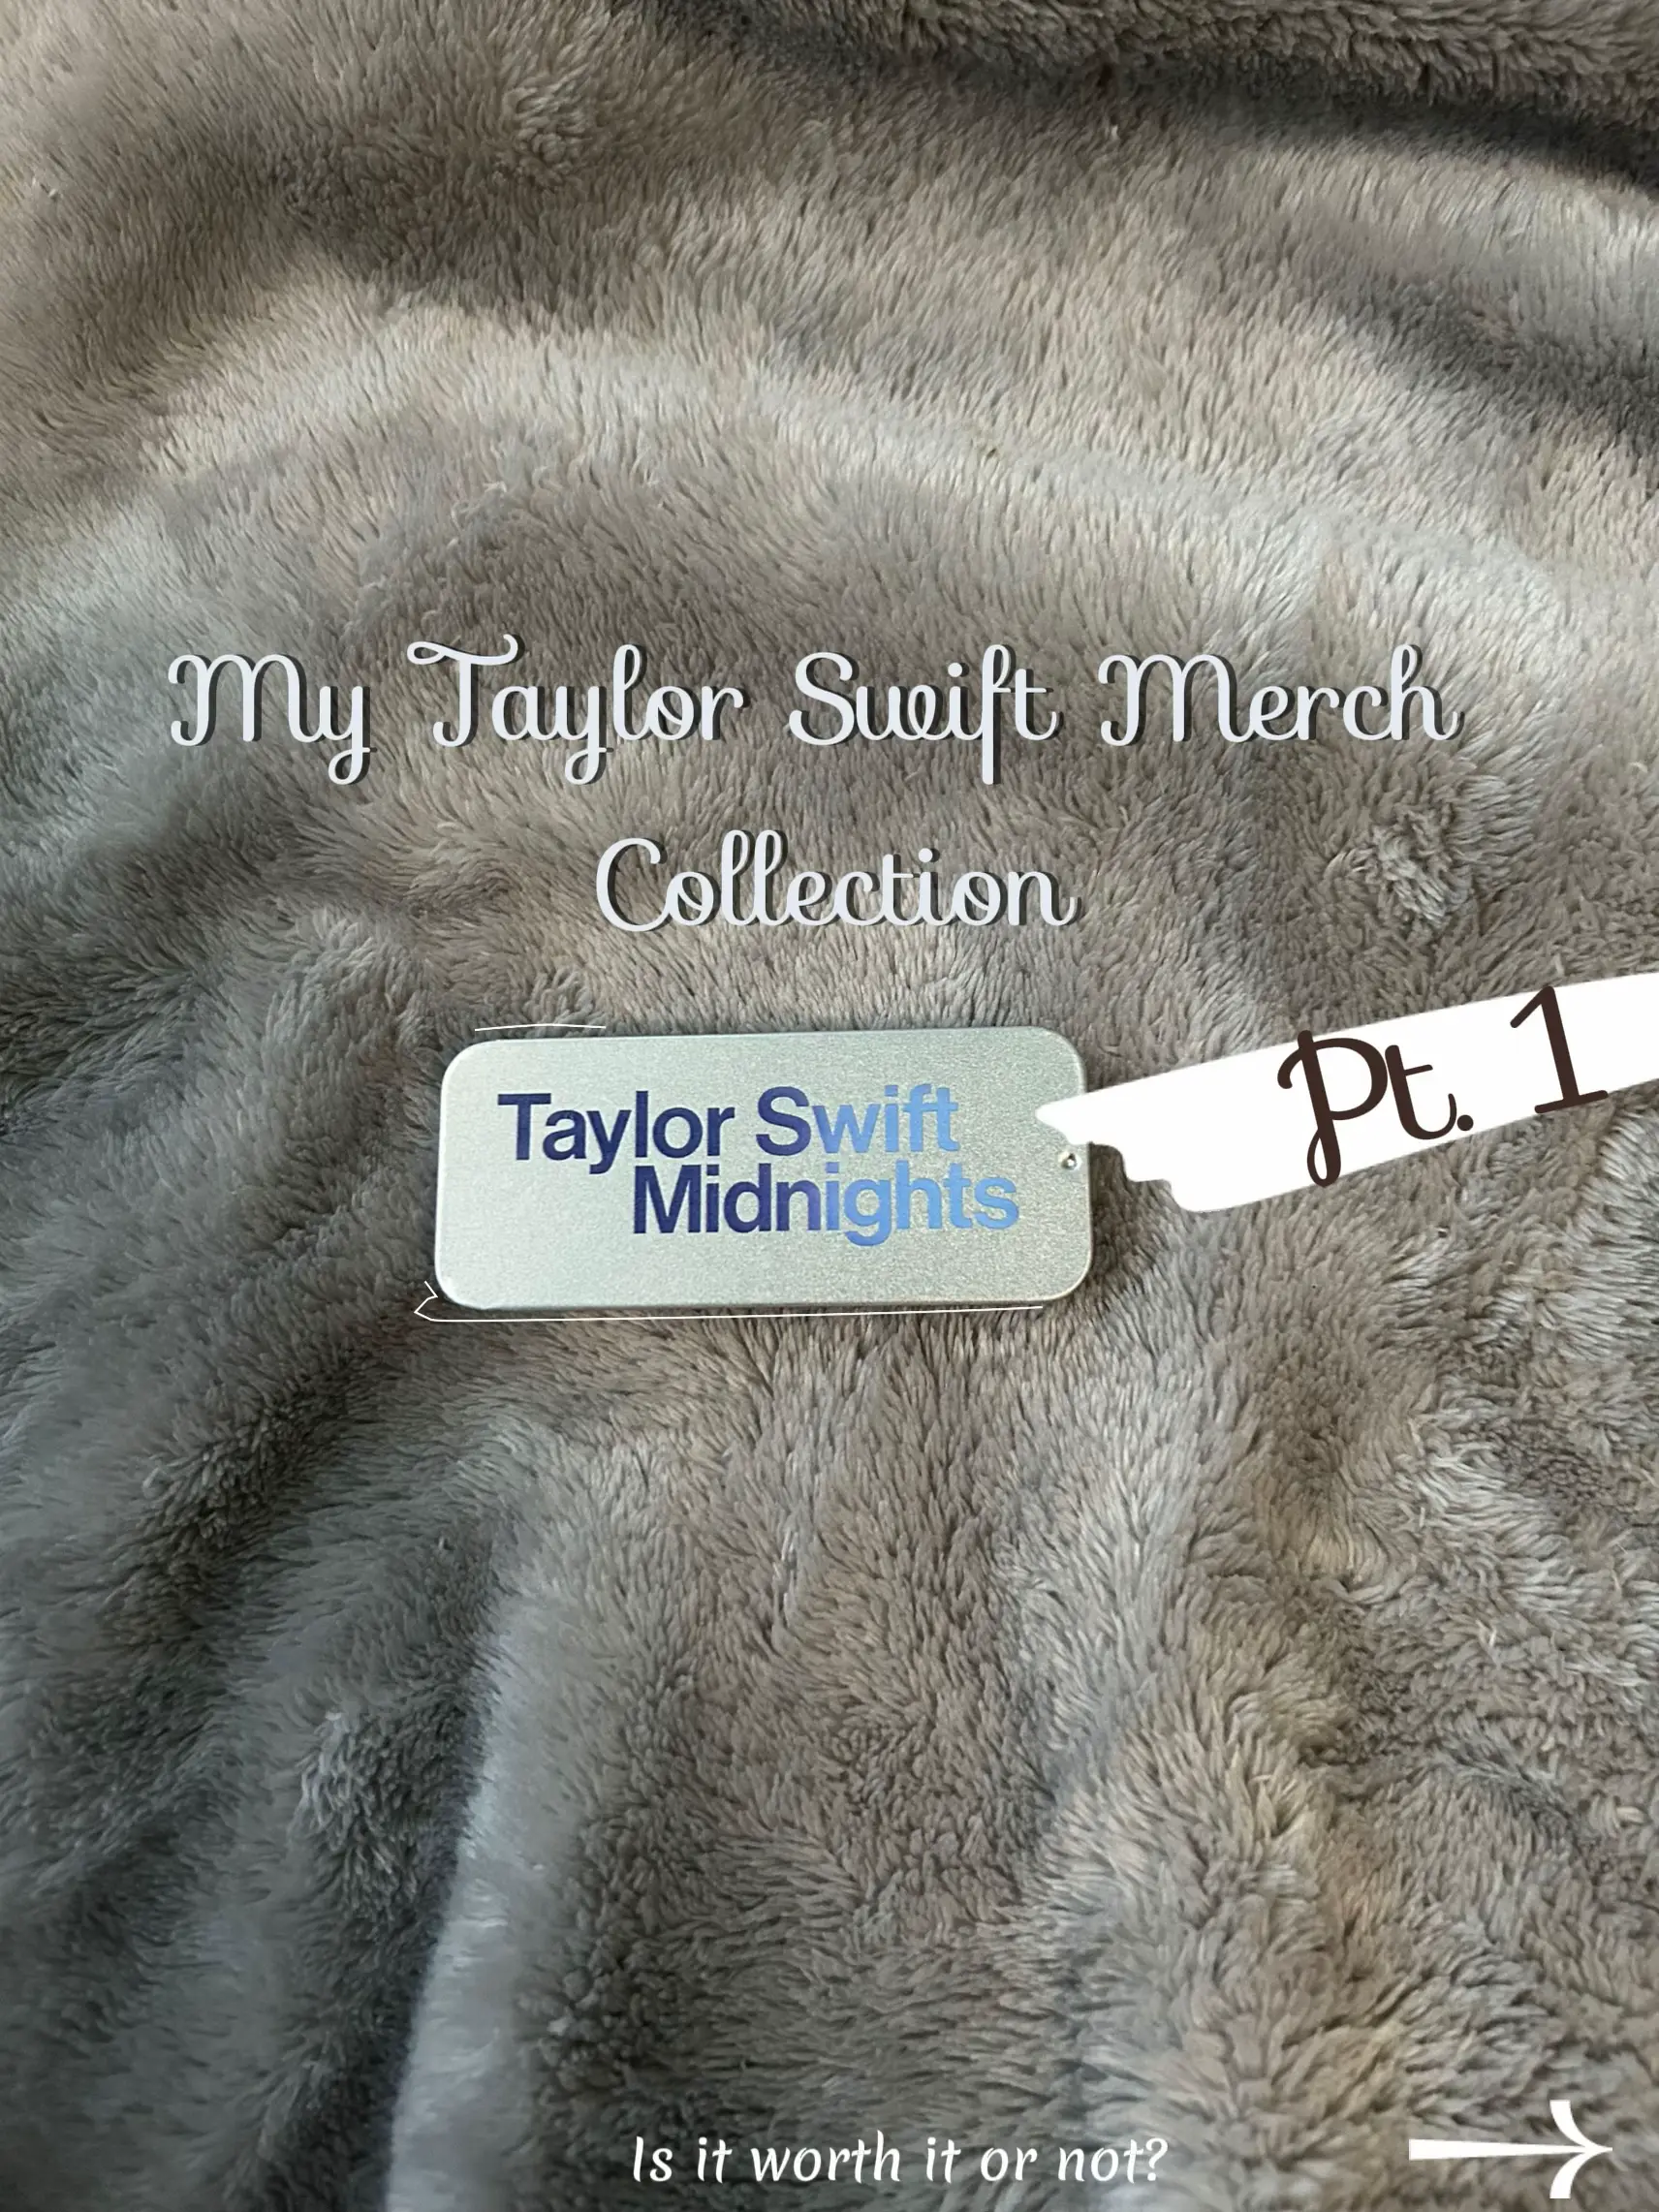 My Taylor Swift Merch Collection, Gallery posted by niko